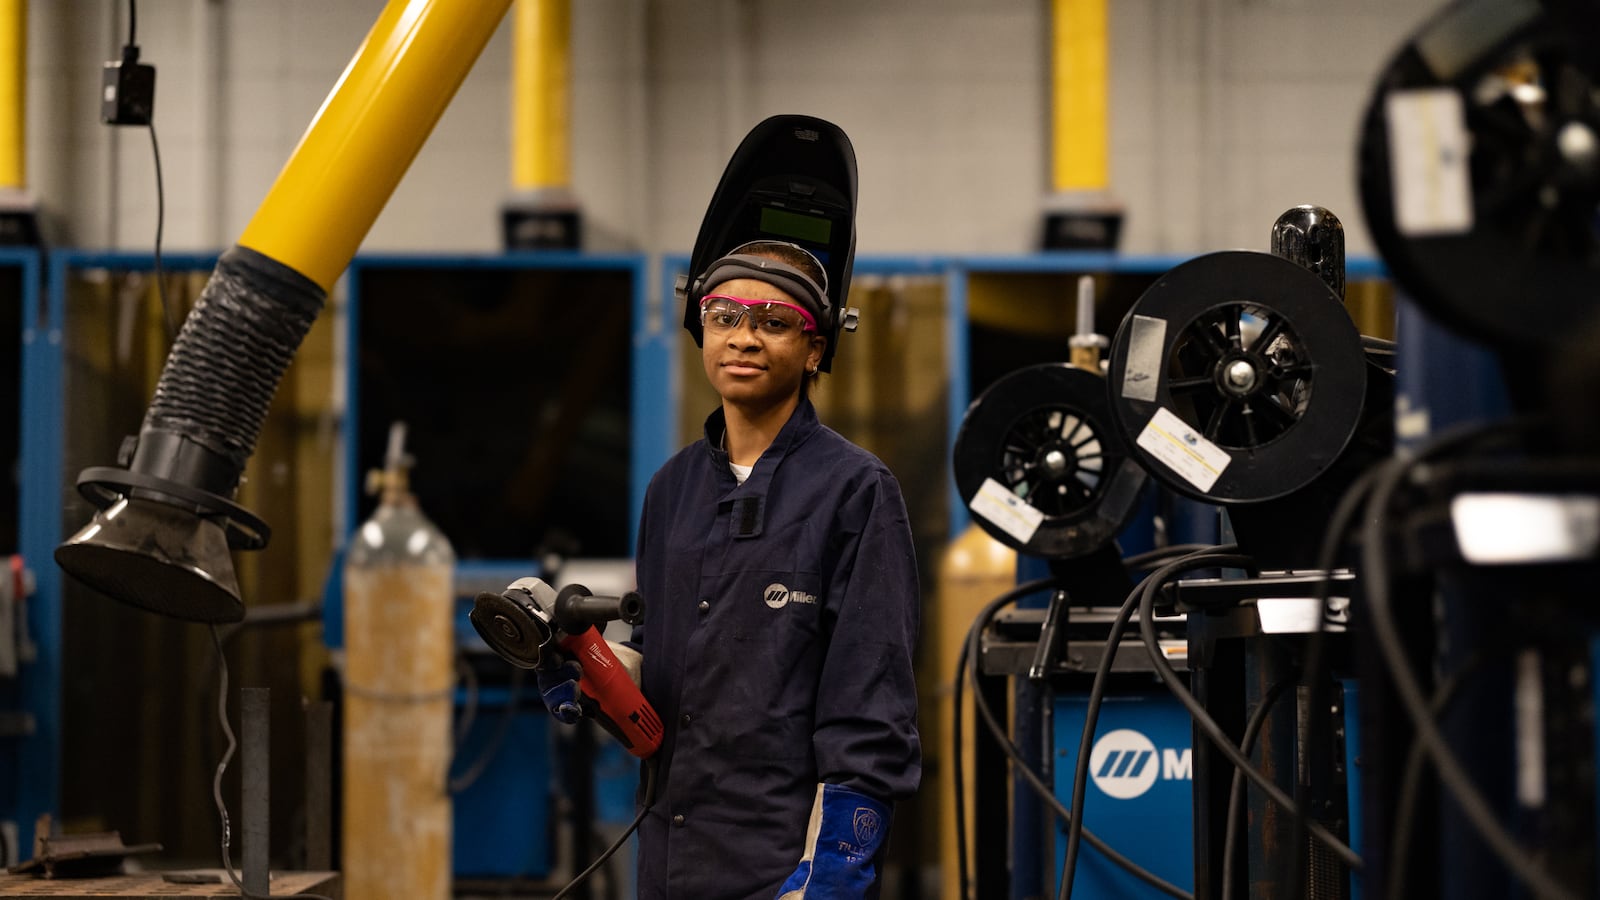 A young woman, wearing protective gear for welding, stands in a technical career classroom and poses for a portrait.